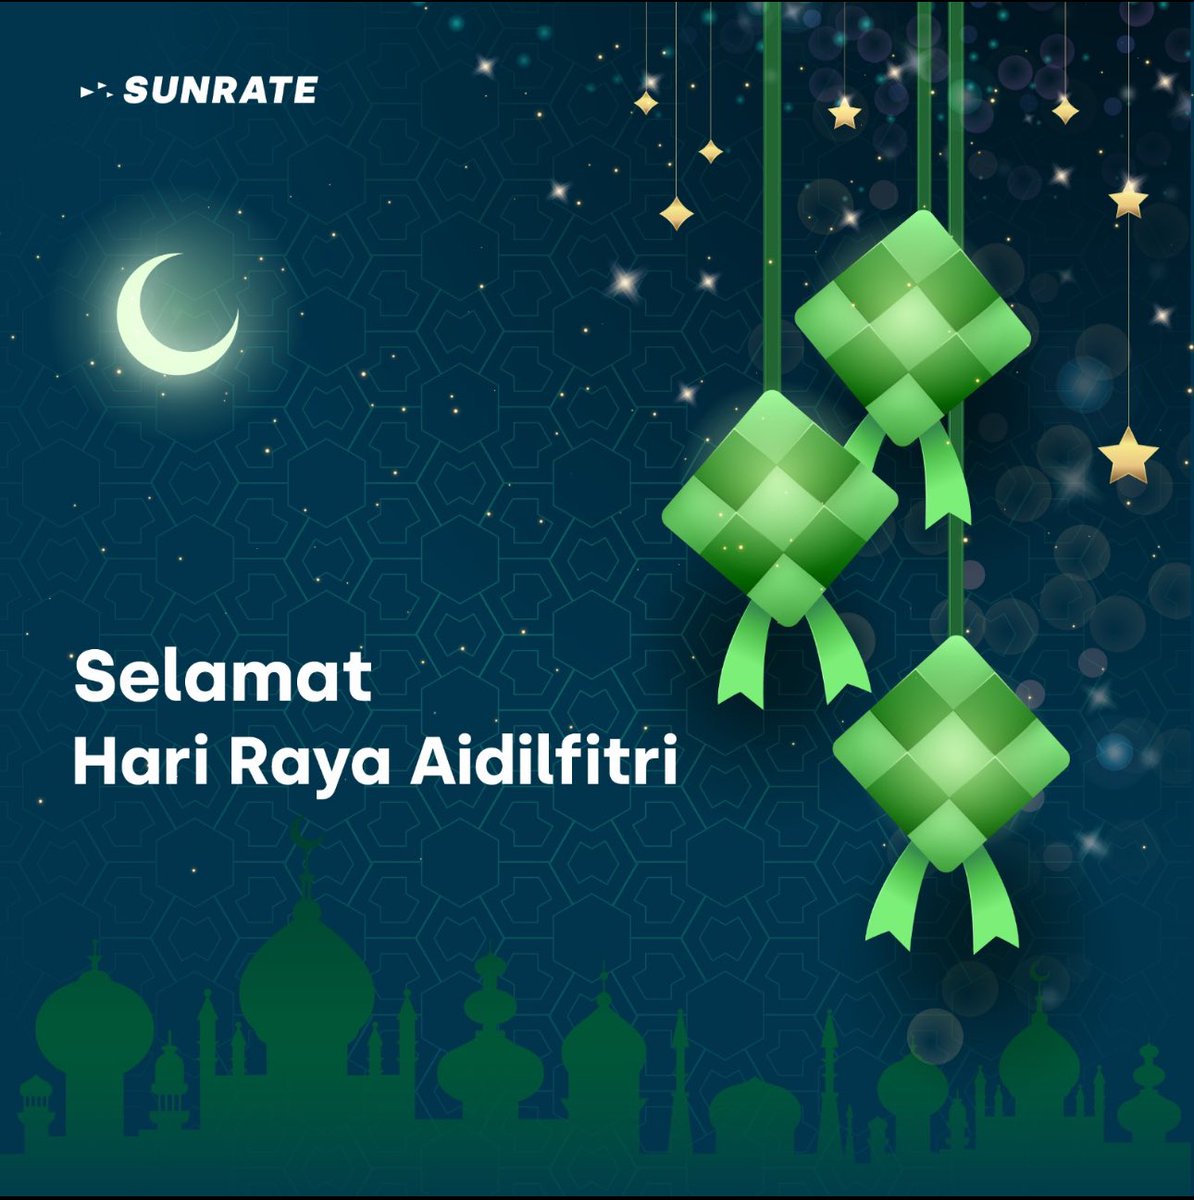 Selamat Hari Raya Aidilfitri from the team at SUNRATE! ✨ May this blessed festivity bring joy, peace, and prosperity to you and your loved ones. Let's embrace the spirit of forgiveness, renew bonds, and celebrate new beginnings together. #SUNRATE #HariRaya2024 #EidMubarak